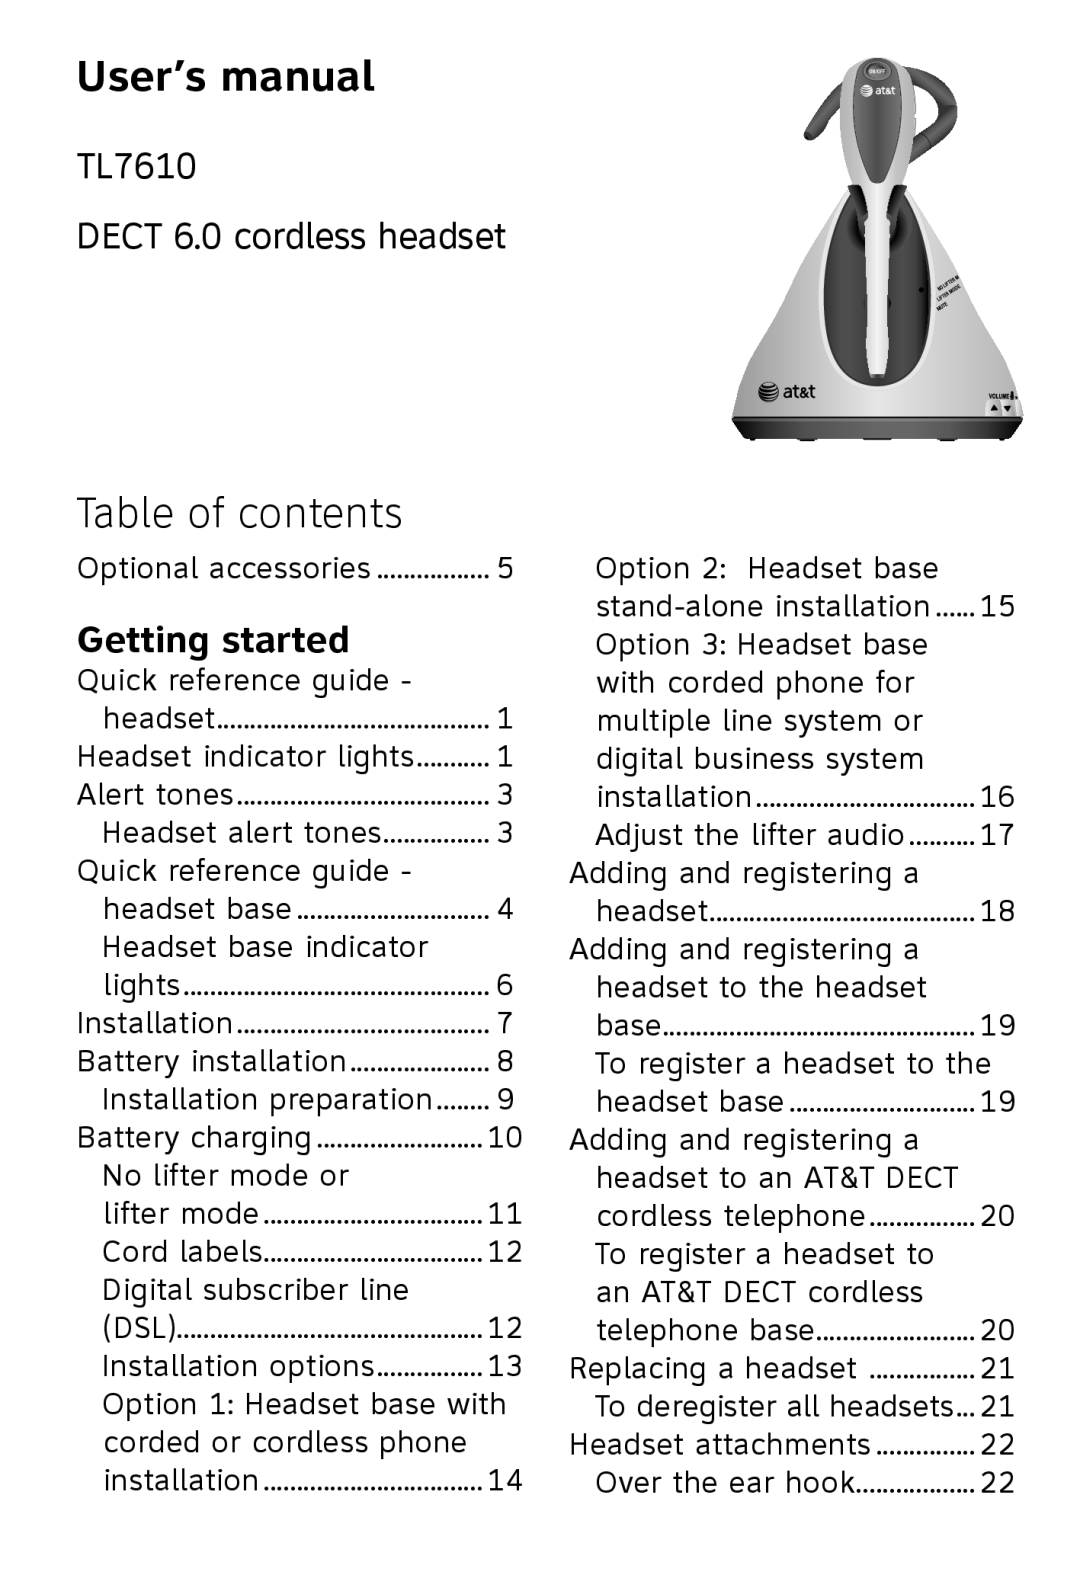 AT&T TL 7610 user manual User’s manual, Table of contents, Getting started, TL7610 DECT 6.0 cordless headset 